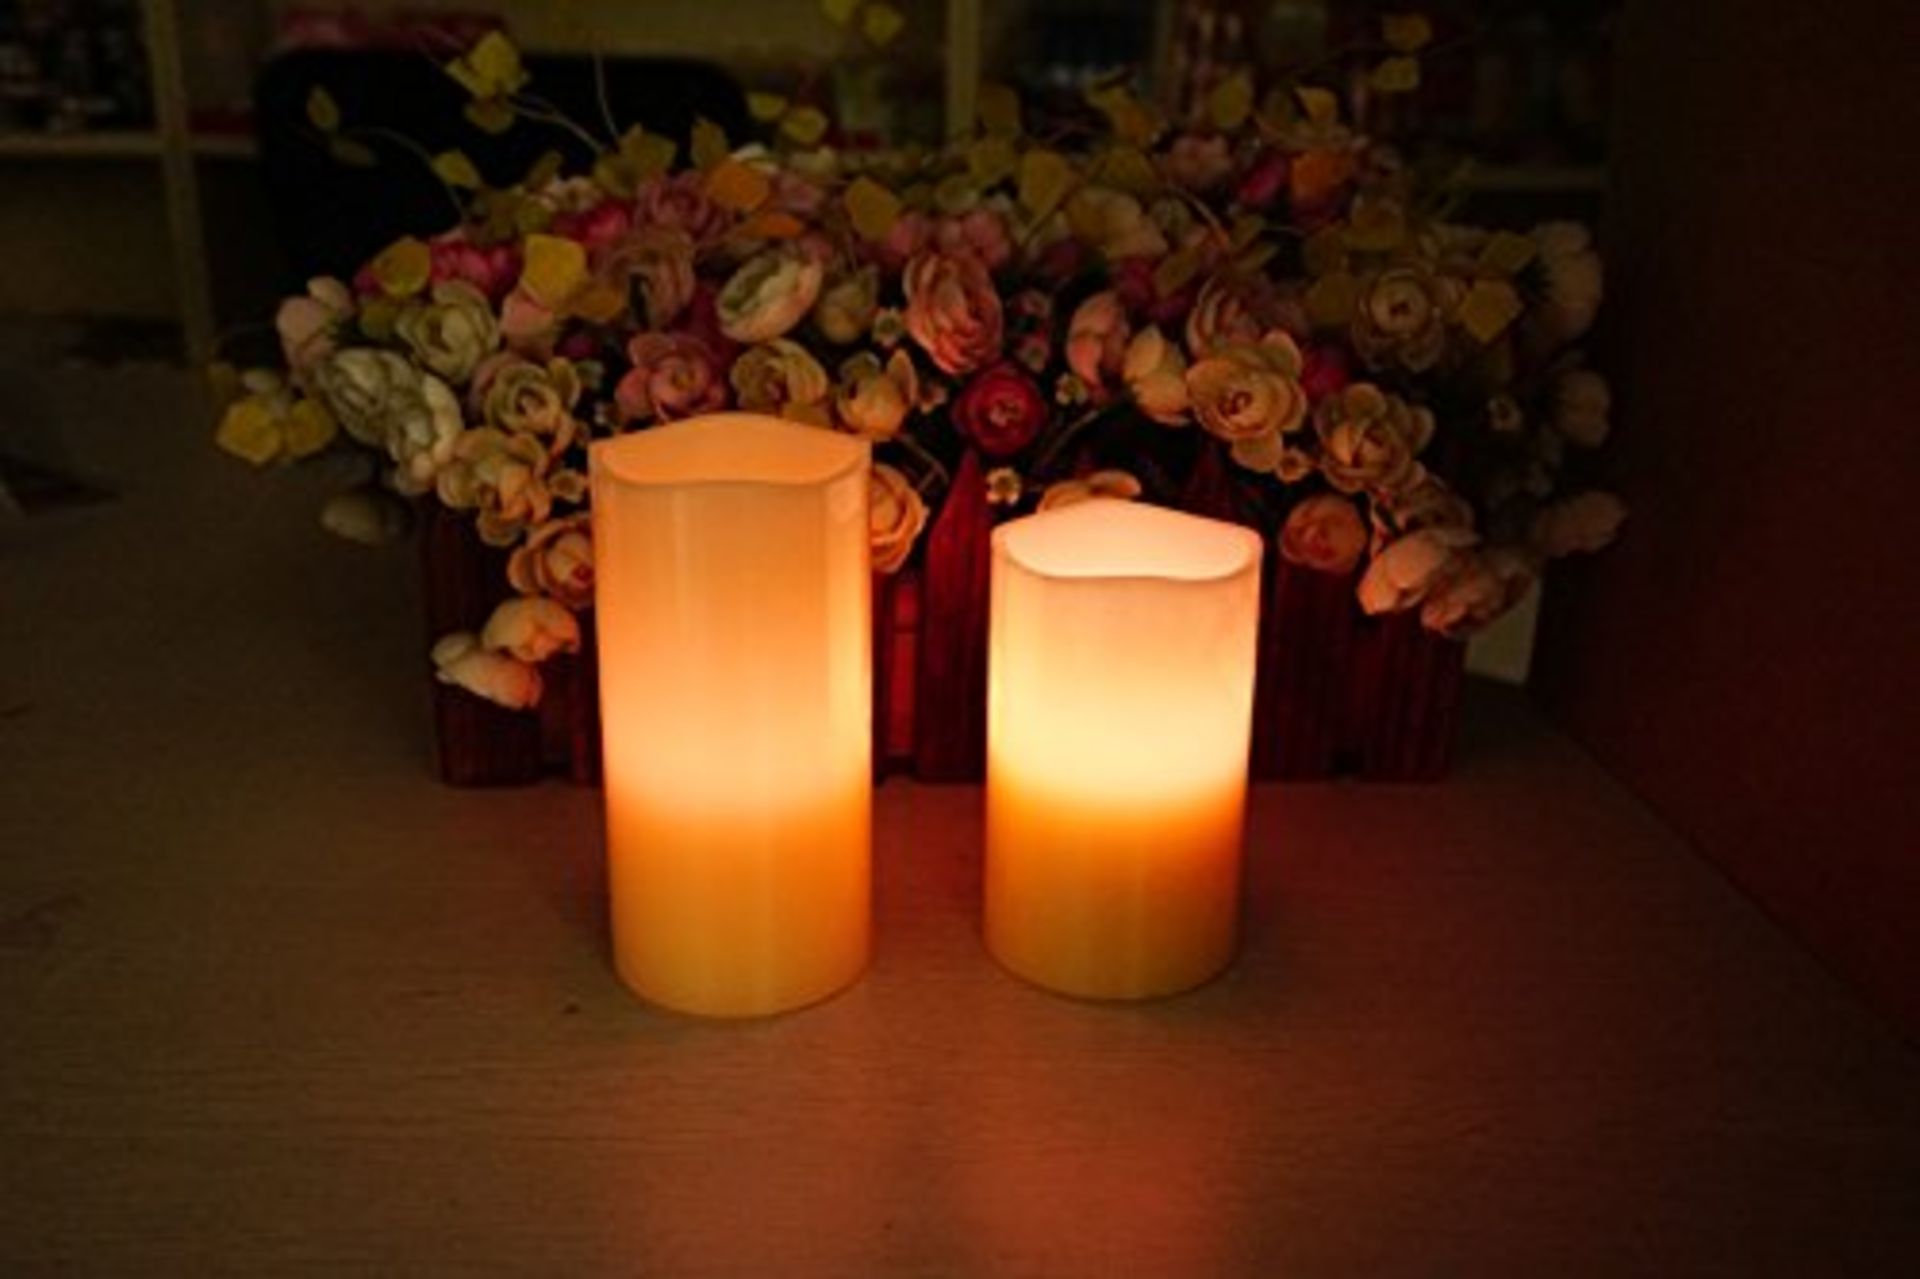 V *TRADE QTY* Brand New 2 Pack of LED Rechargeable Jasmine Scented Candles with Colour changing